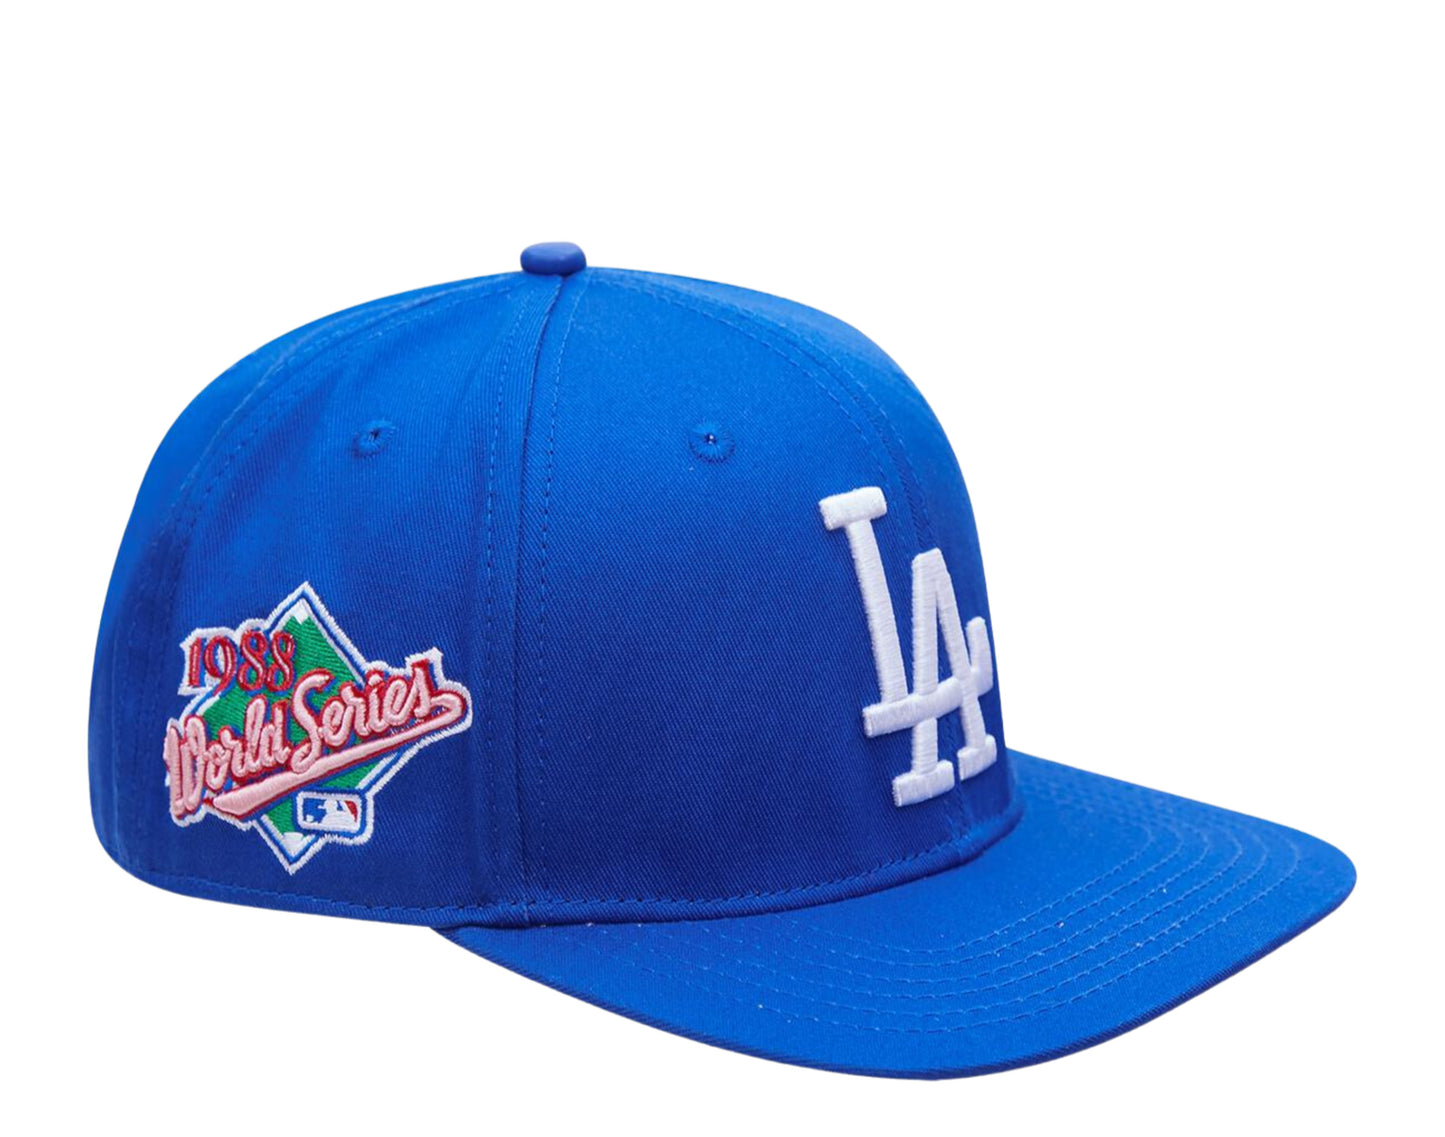 MLB World Series 1988 Patch Retro Crown 9FIFTY Cap D03_599